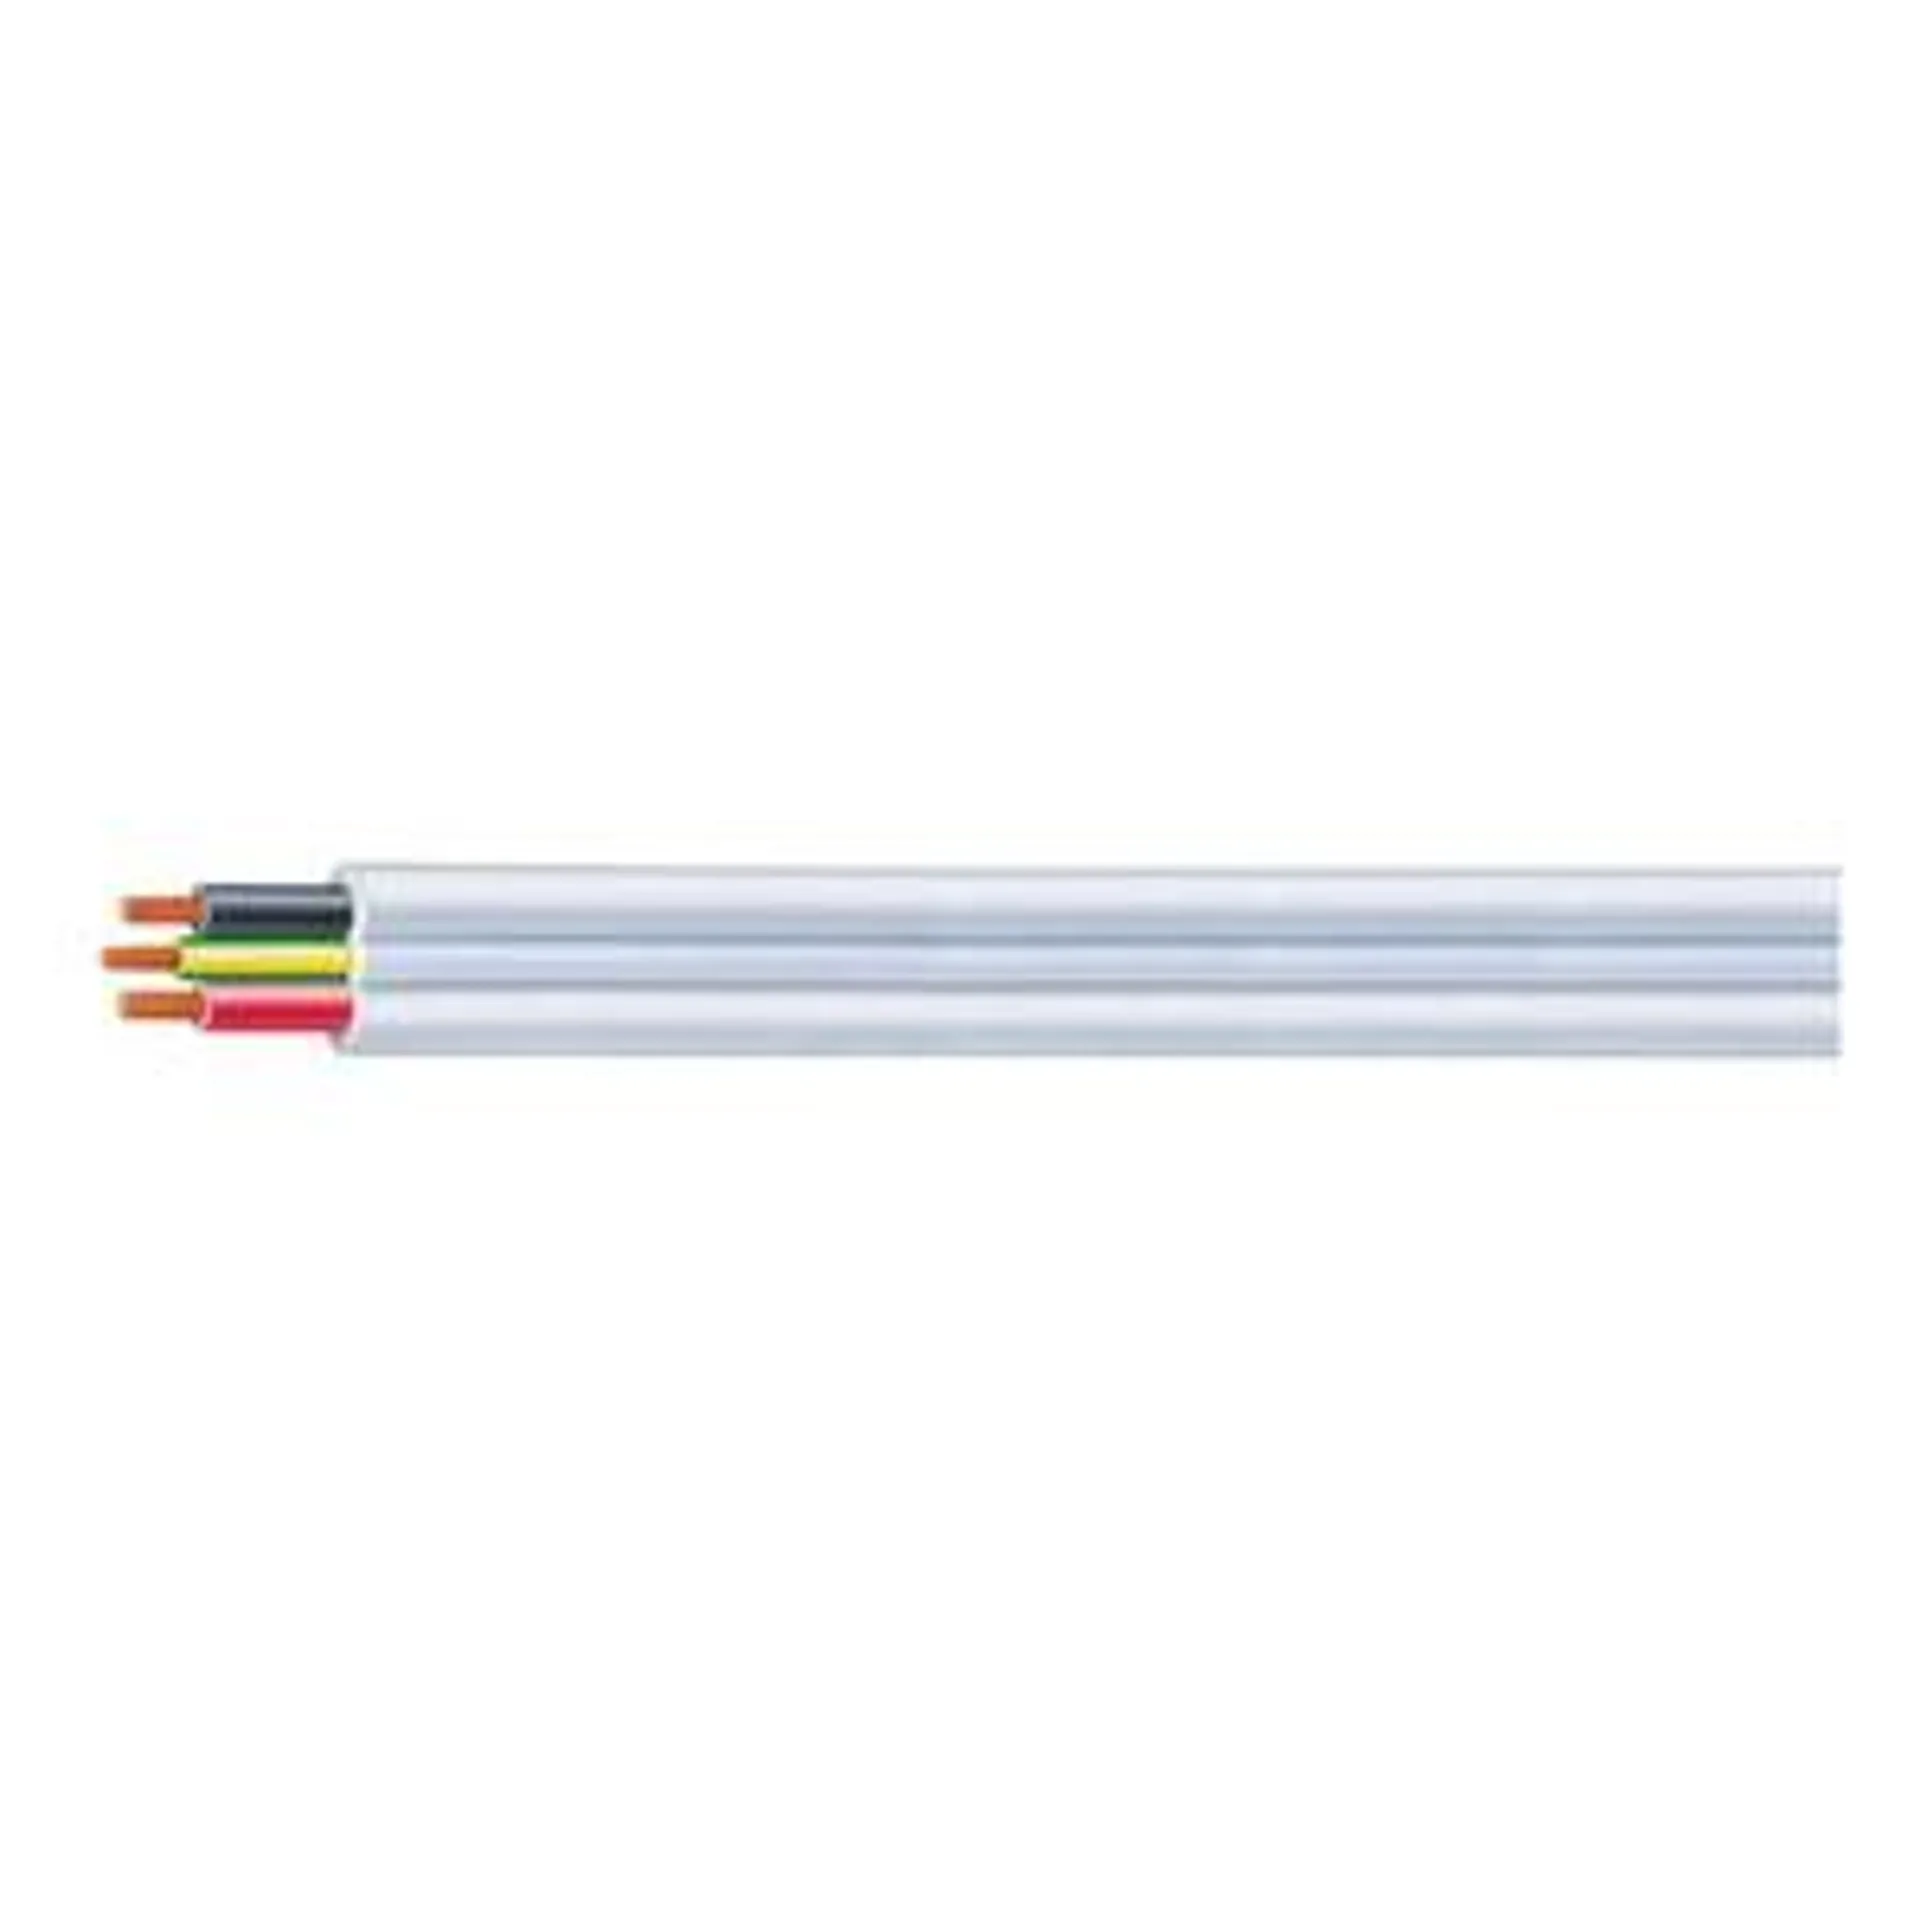 Cable 4mm 2c + Earth Flat TPS White